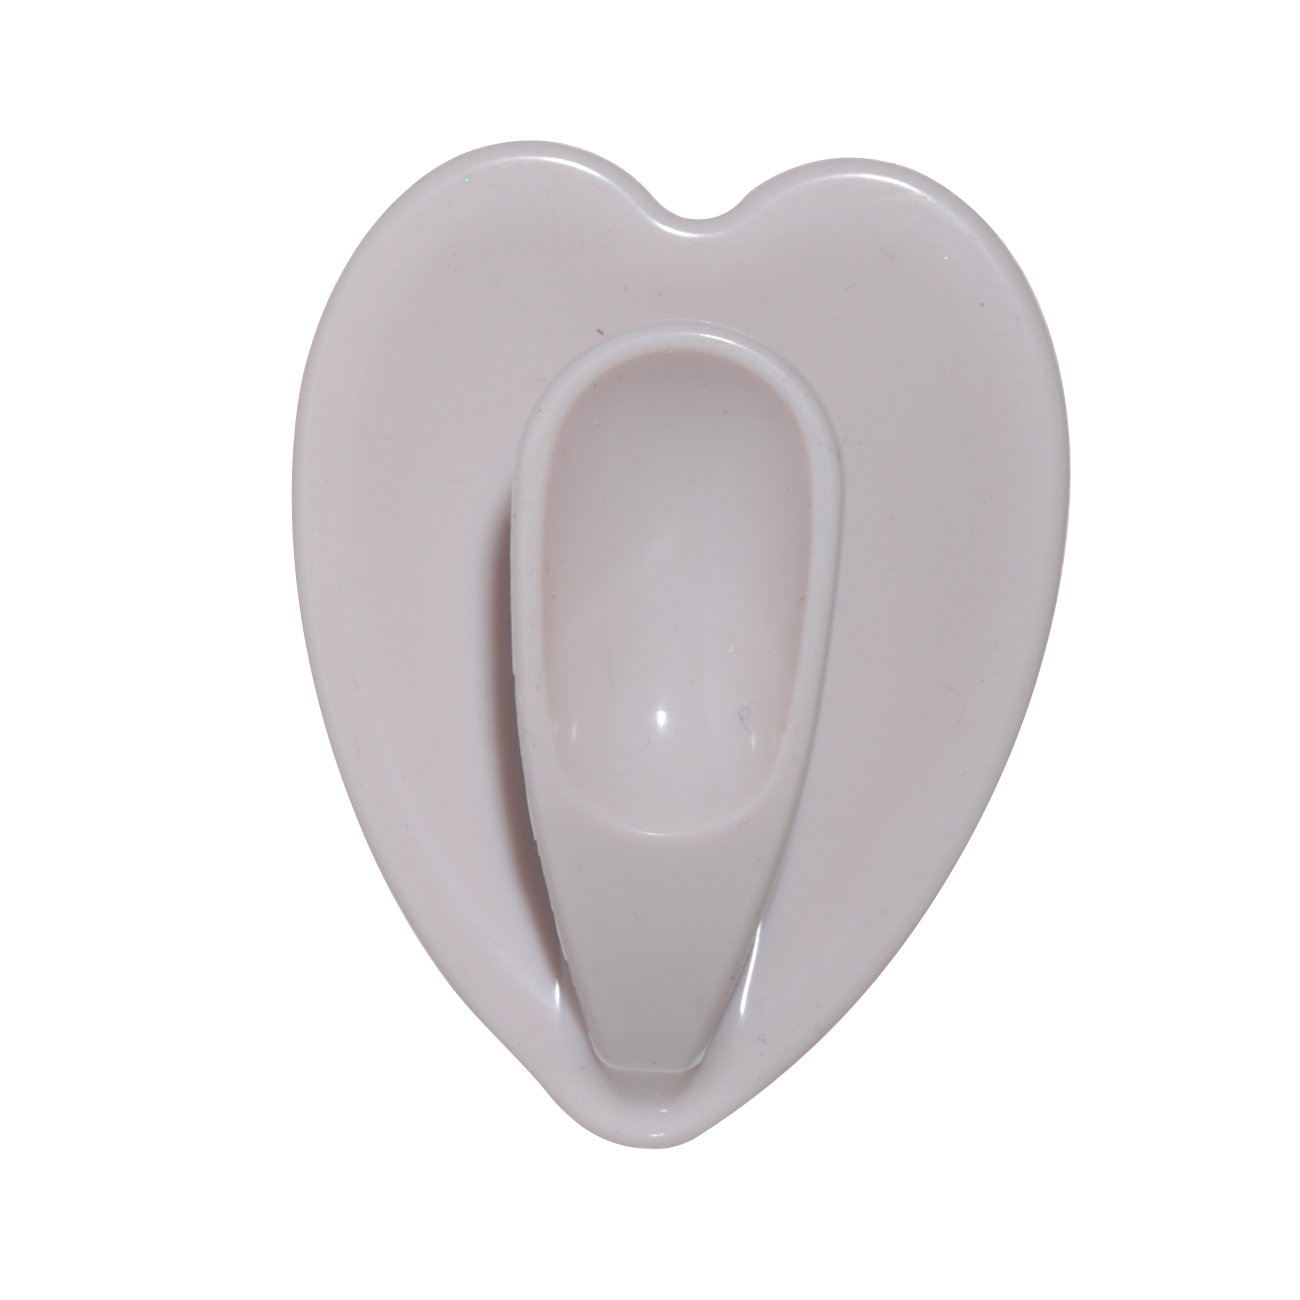 Facial cleansing brush, 7 cm, Massage, Suction Cup, Silicone, Beige, Heart, Manny изображение № 2